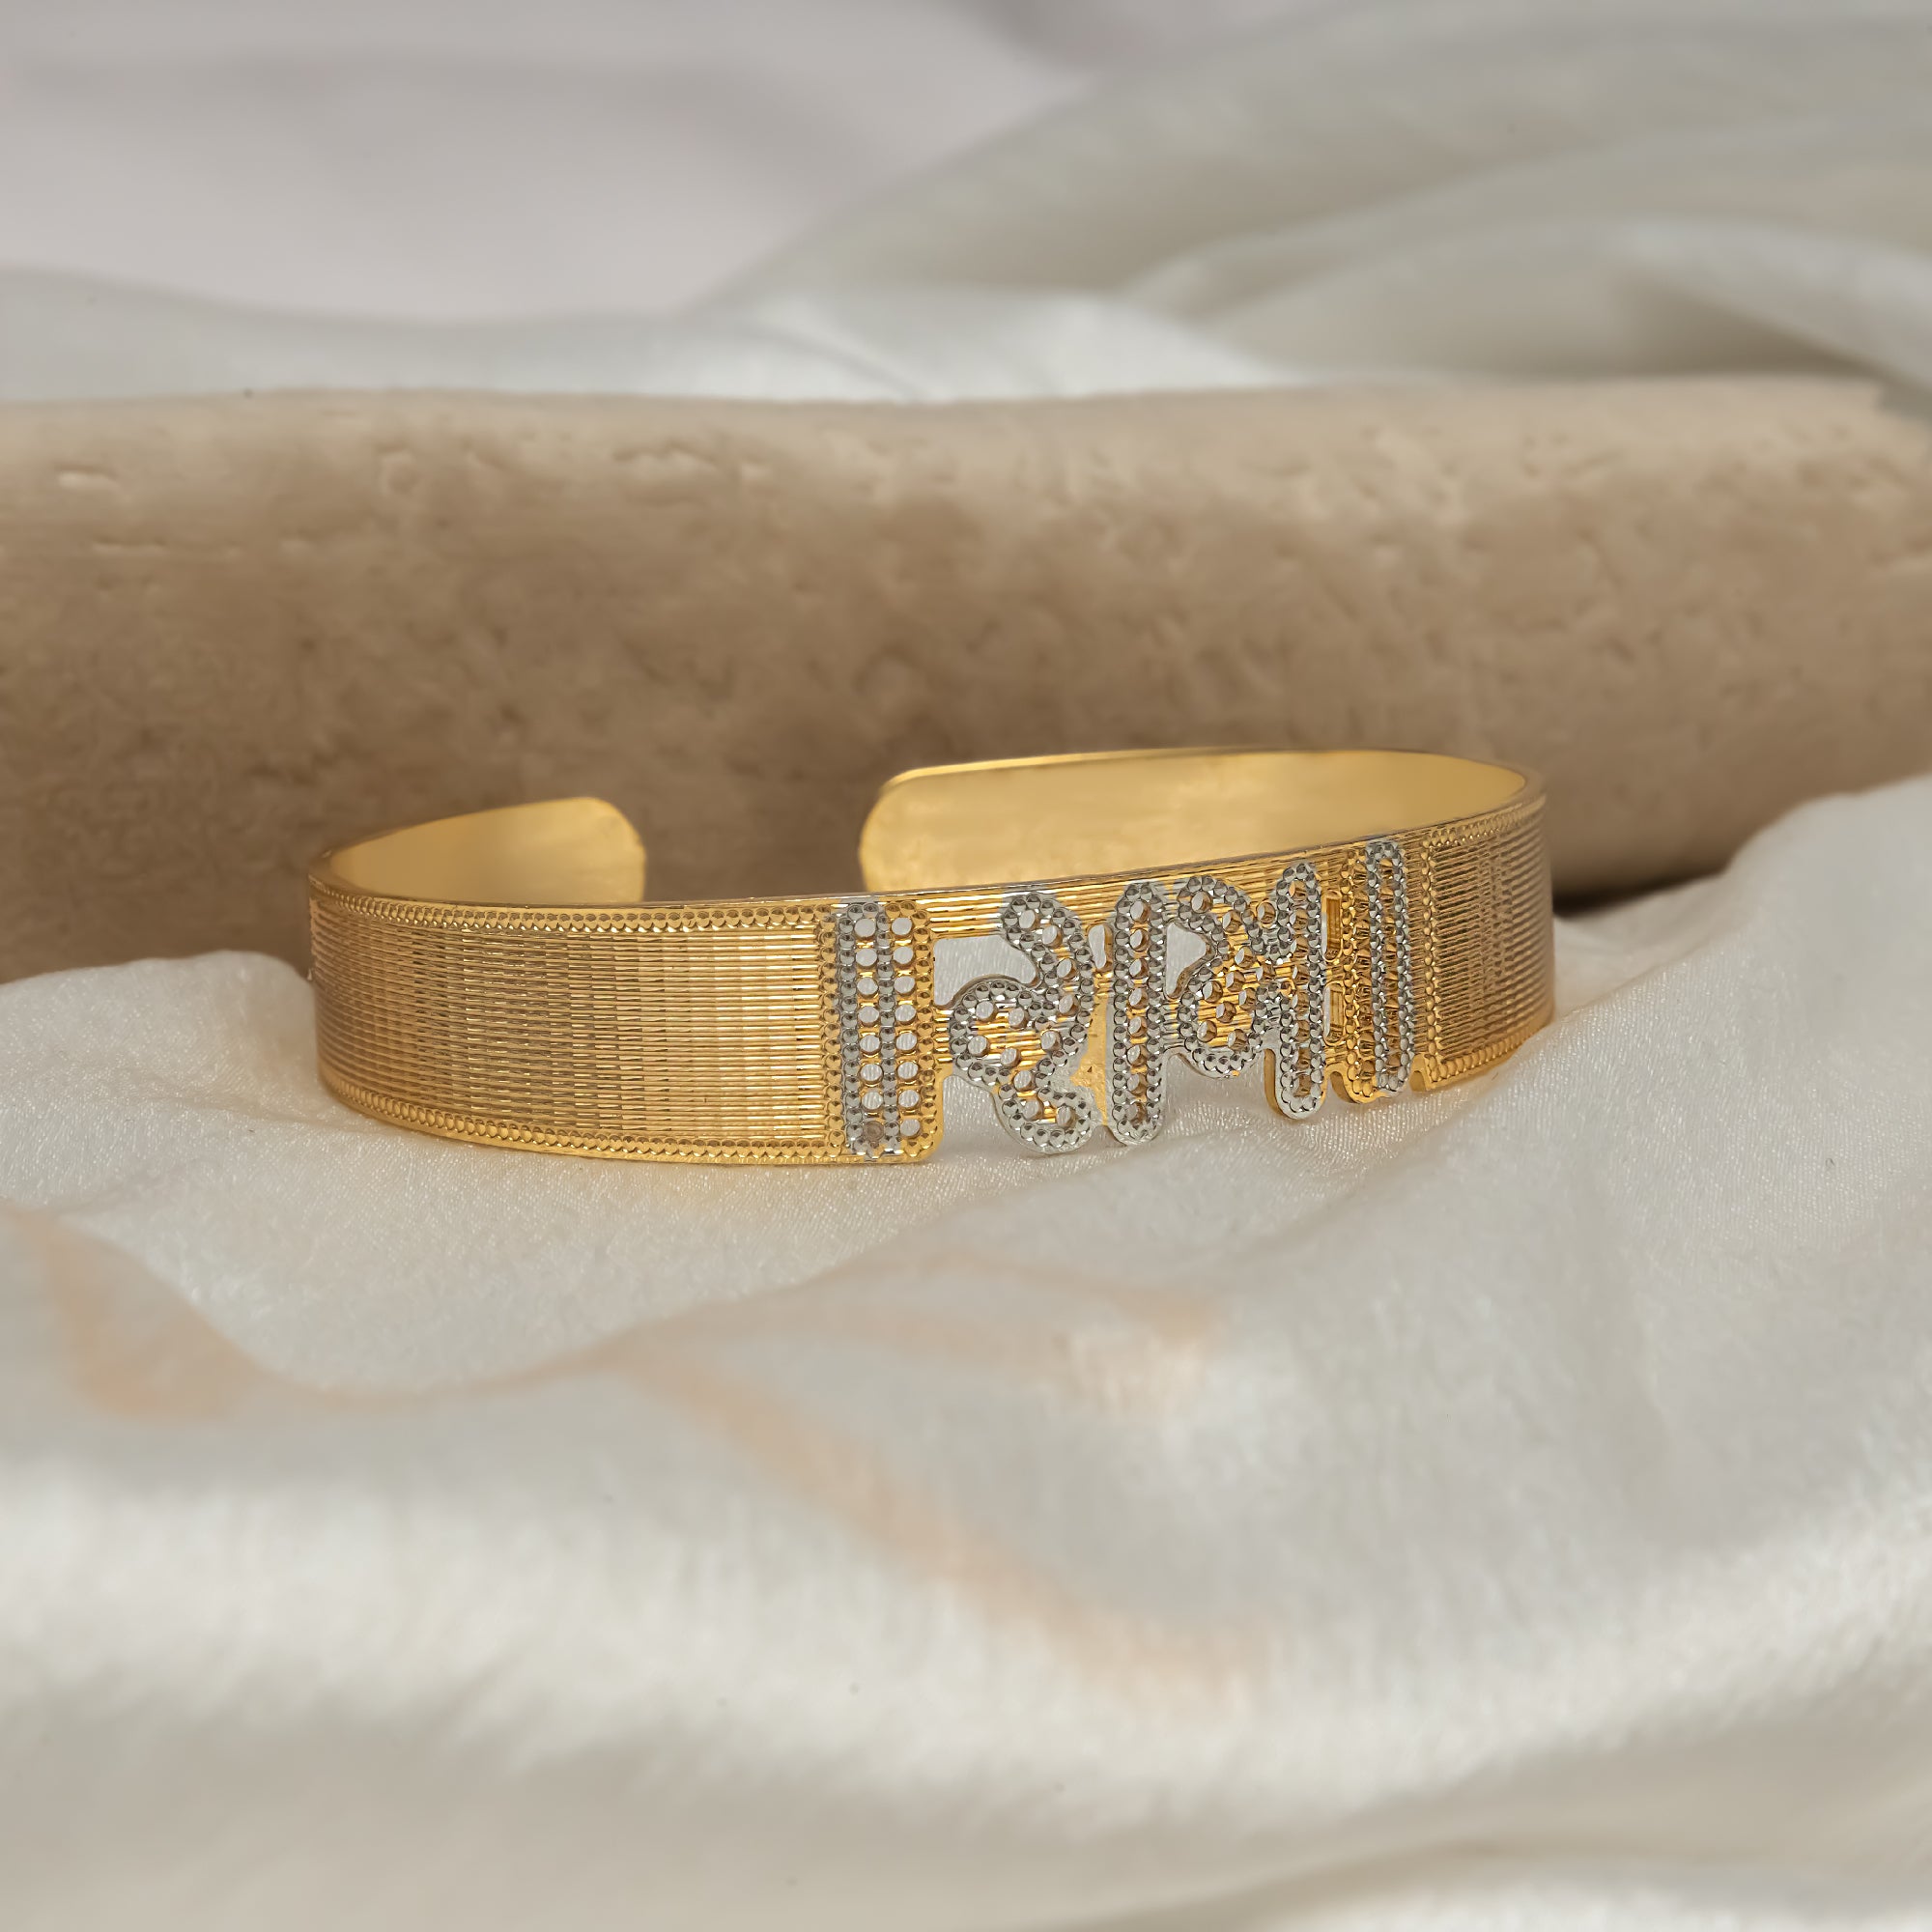 Om Sai Ram Brass Healing Cuff Bracelet For Metabolic function Eeduces  Inflammation at Rs 95/piece in Moradabad